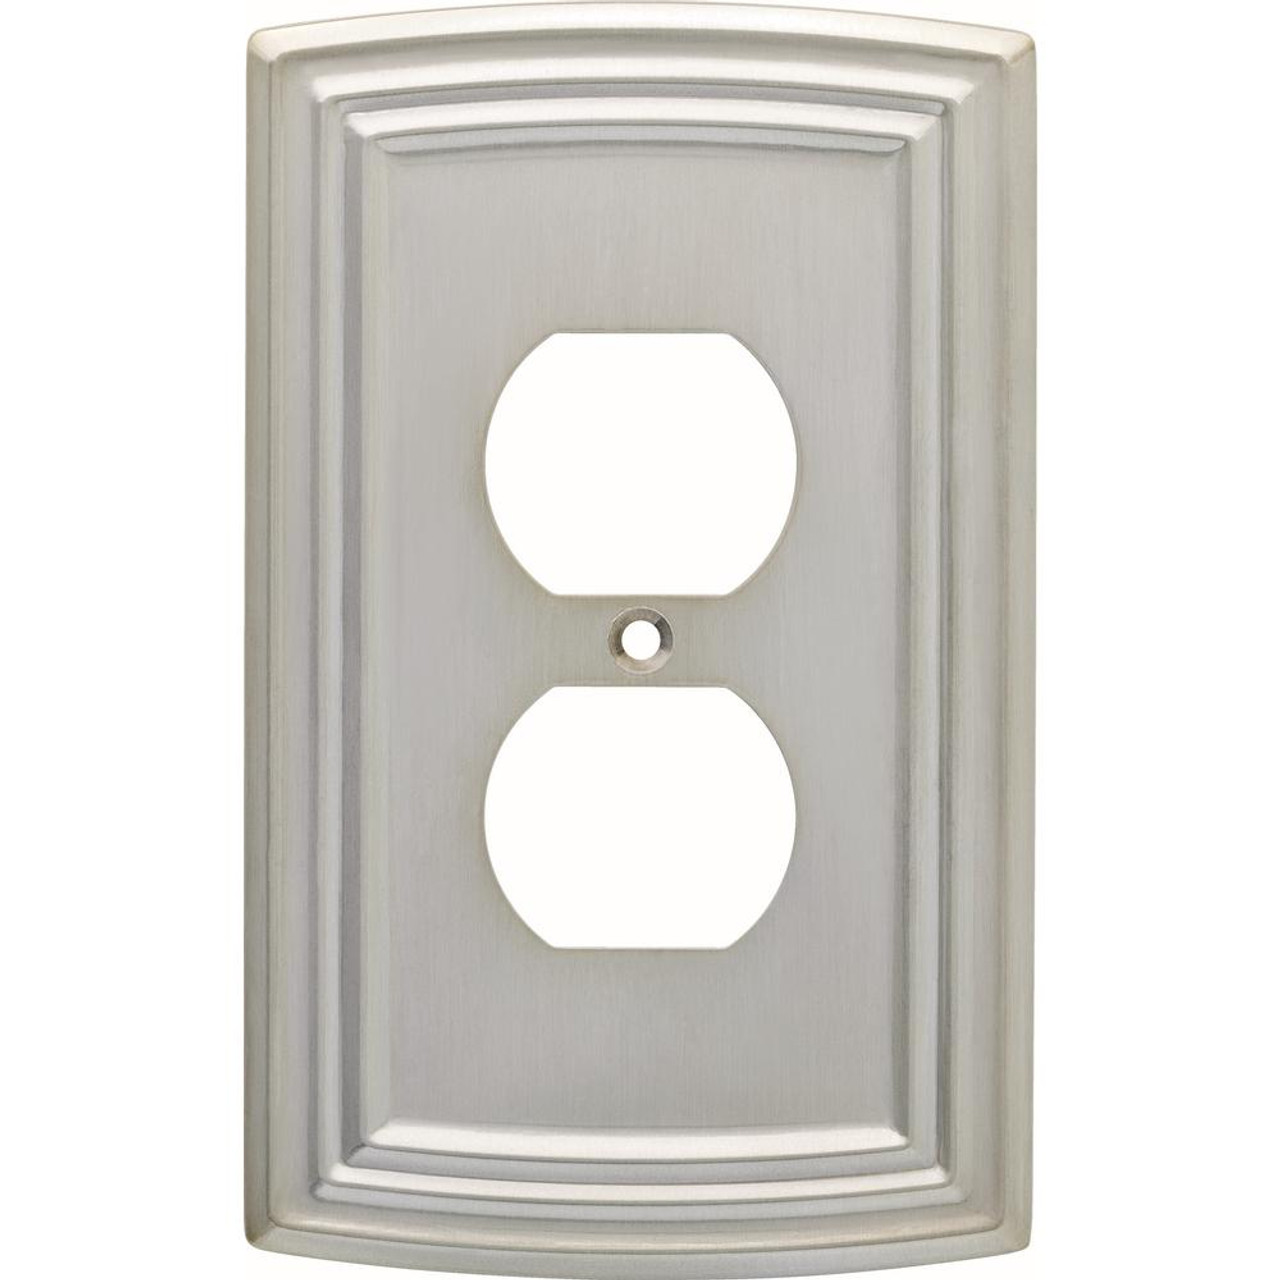 Hampton Bay W36397-SNE Classical Emery Duplex Outlet Satin Nickel Cover Plate